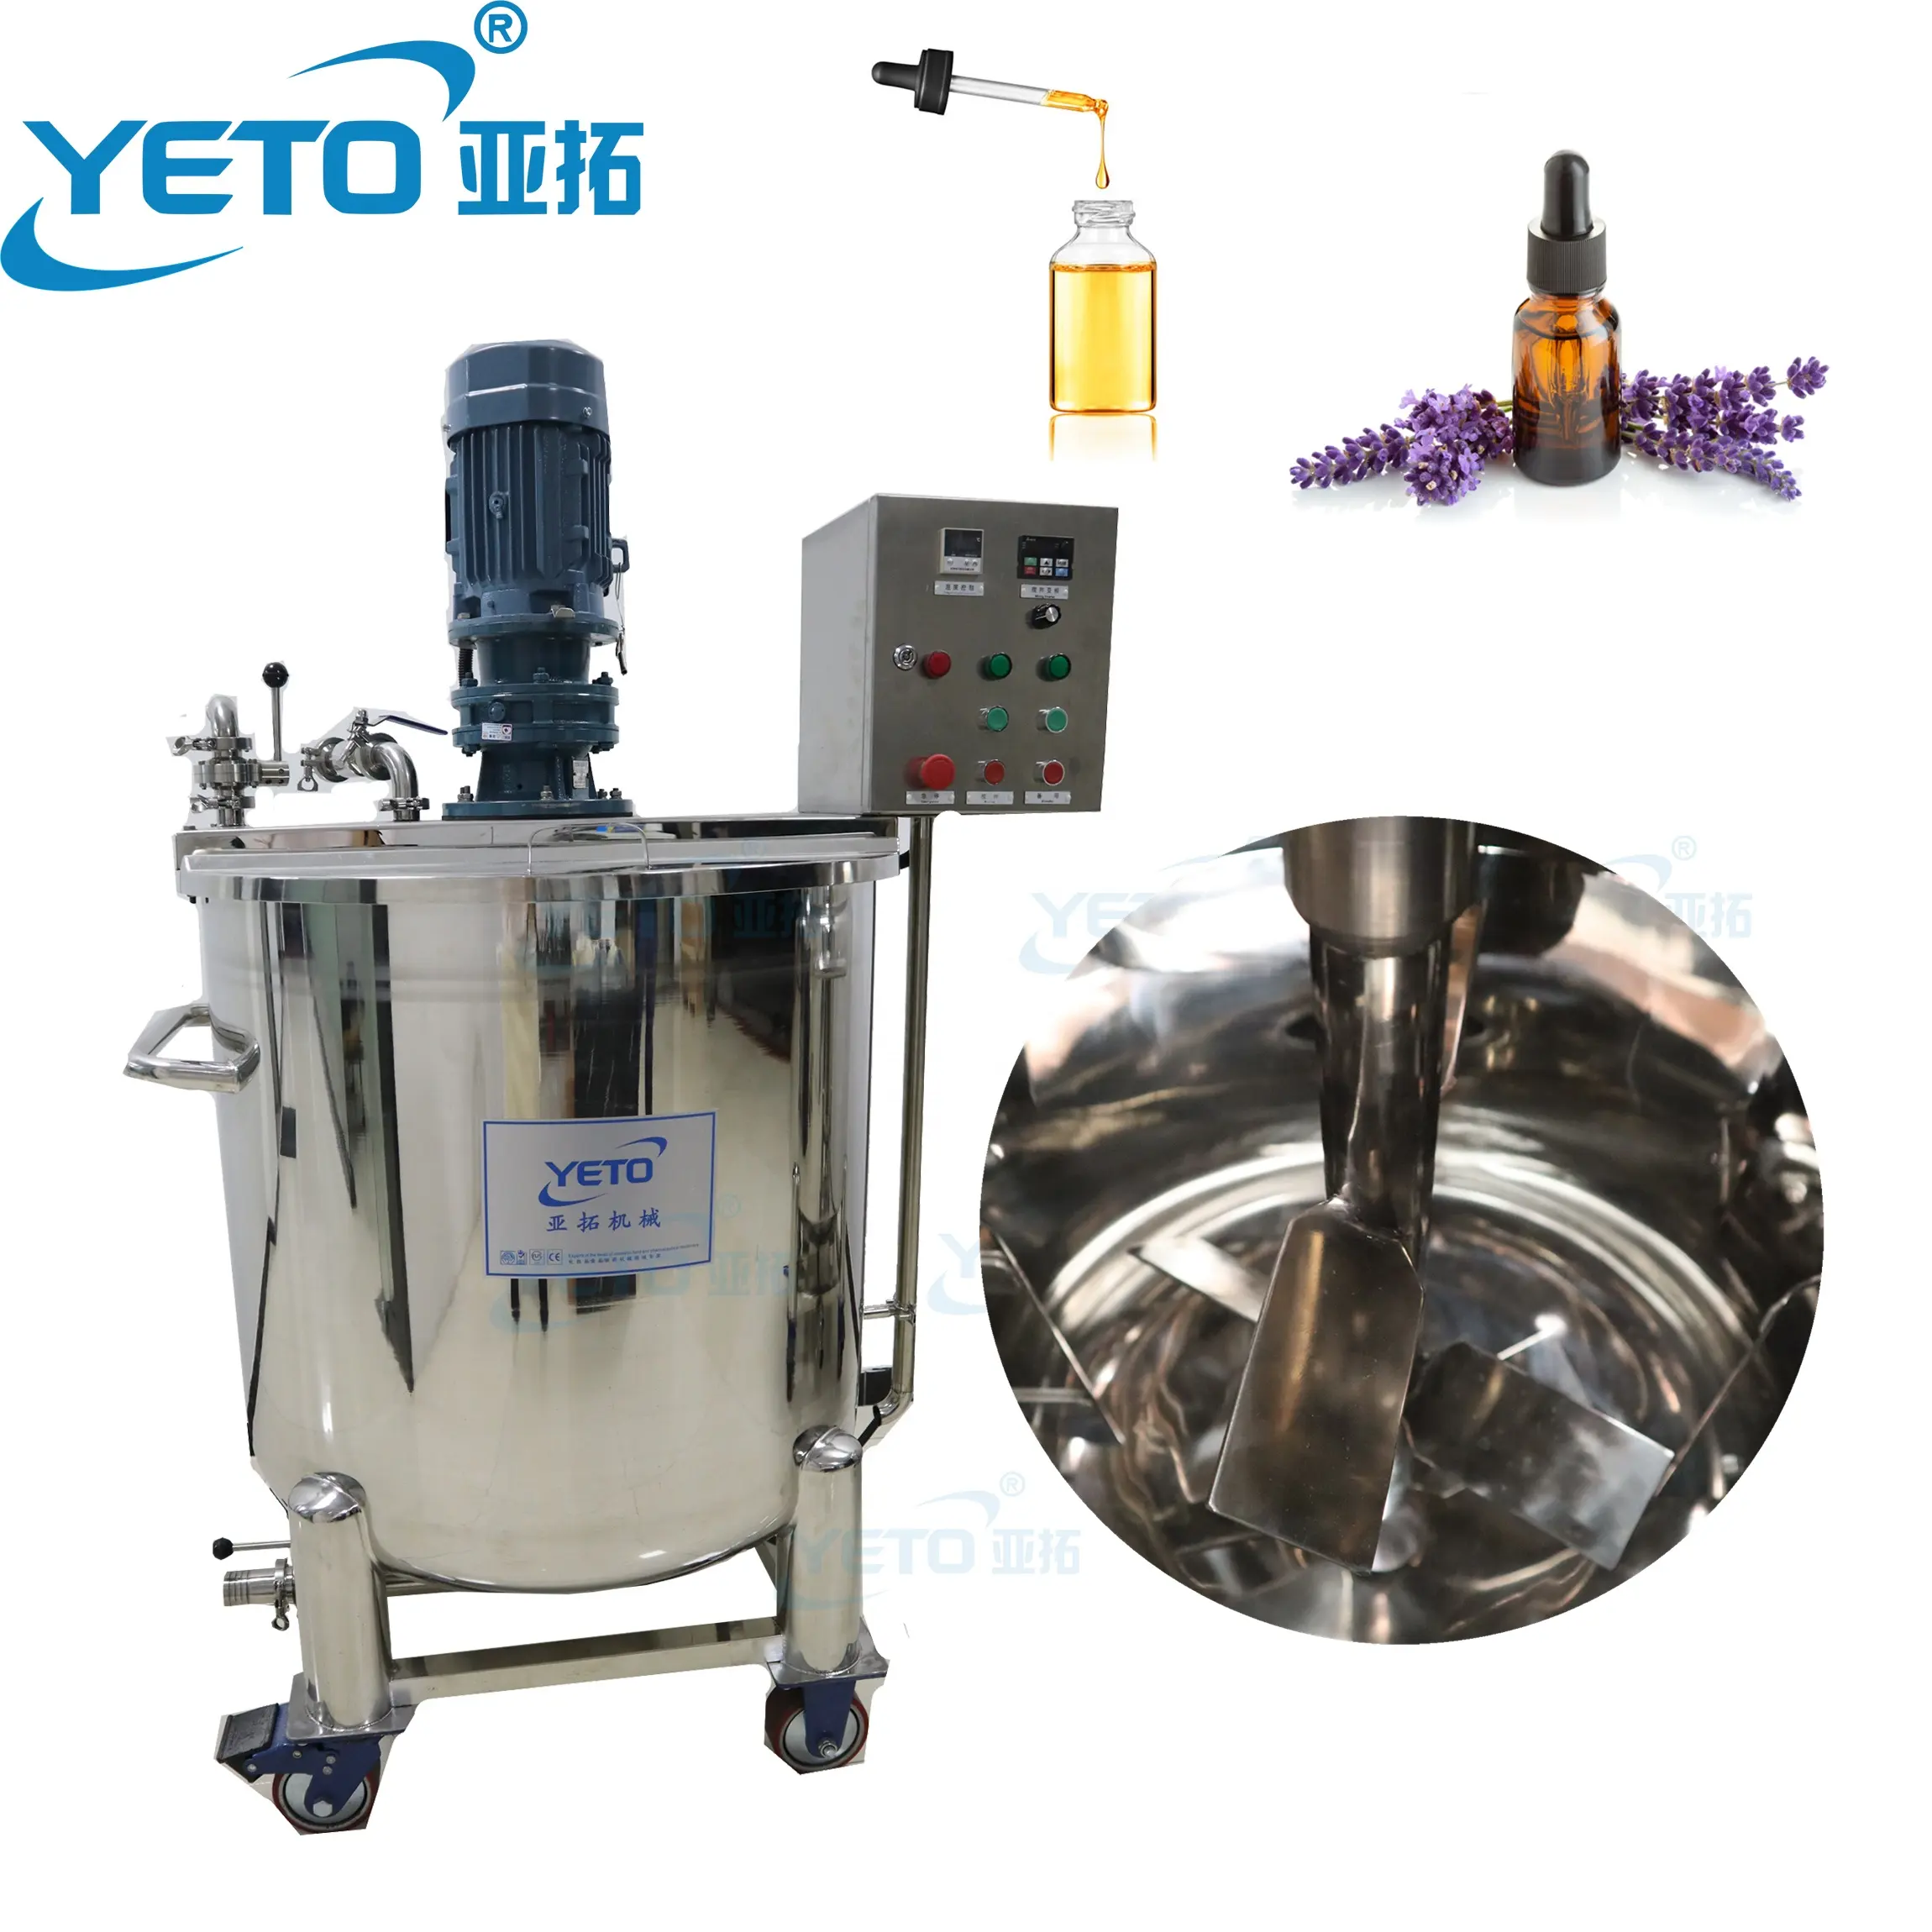 Factory Price High Quality Stainless Steel Heating Mixing Machine Liquid Cosmetic Body Lotion Mixing Tank With Agitator